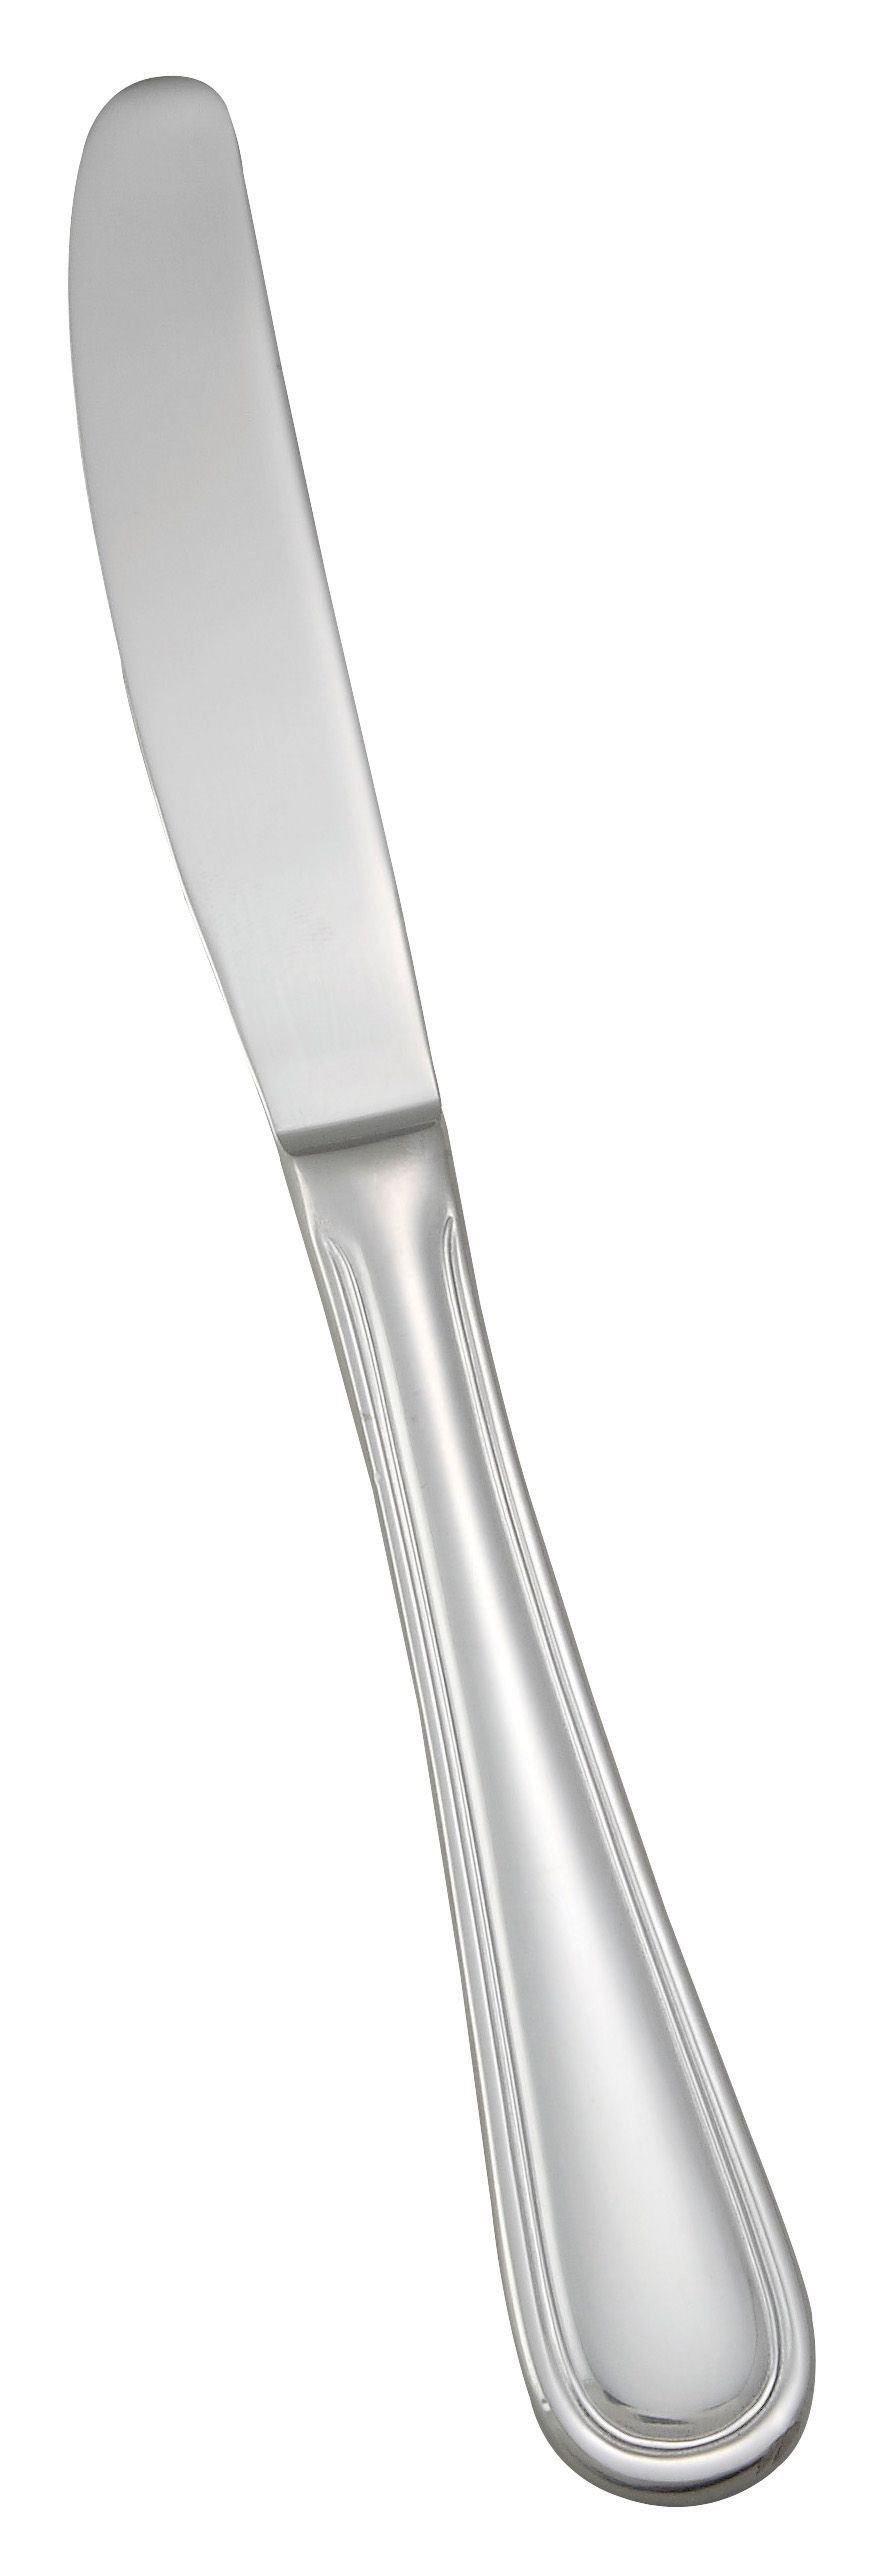 Winco 0030-15 Shangarila Extra Heavy Hollow Handle Stainless Steel Table Knife (12/Pack)